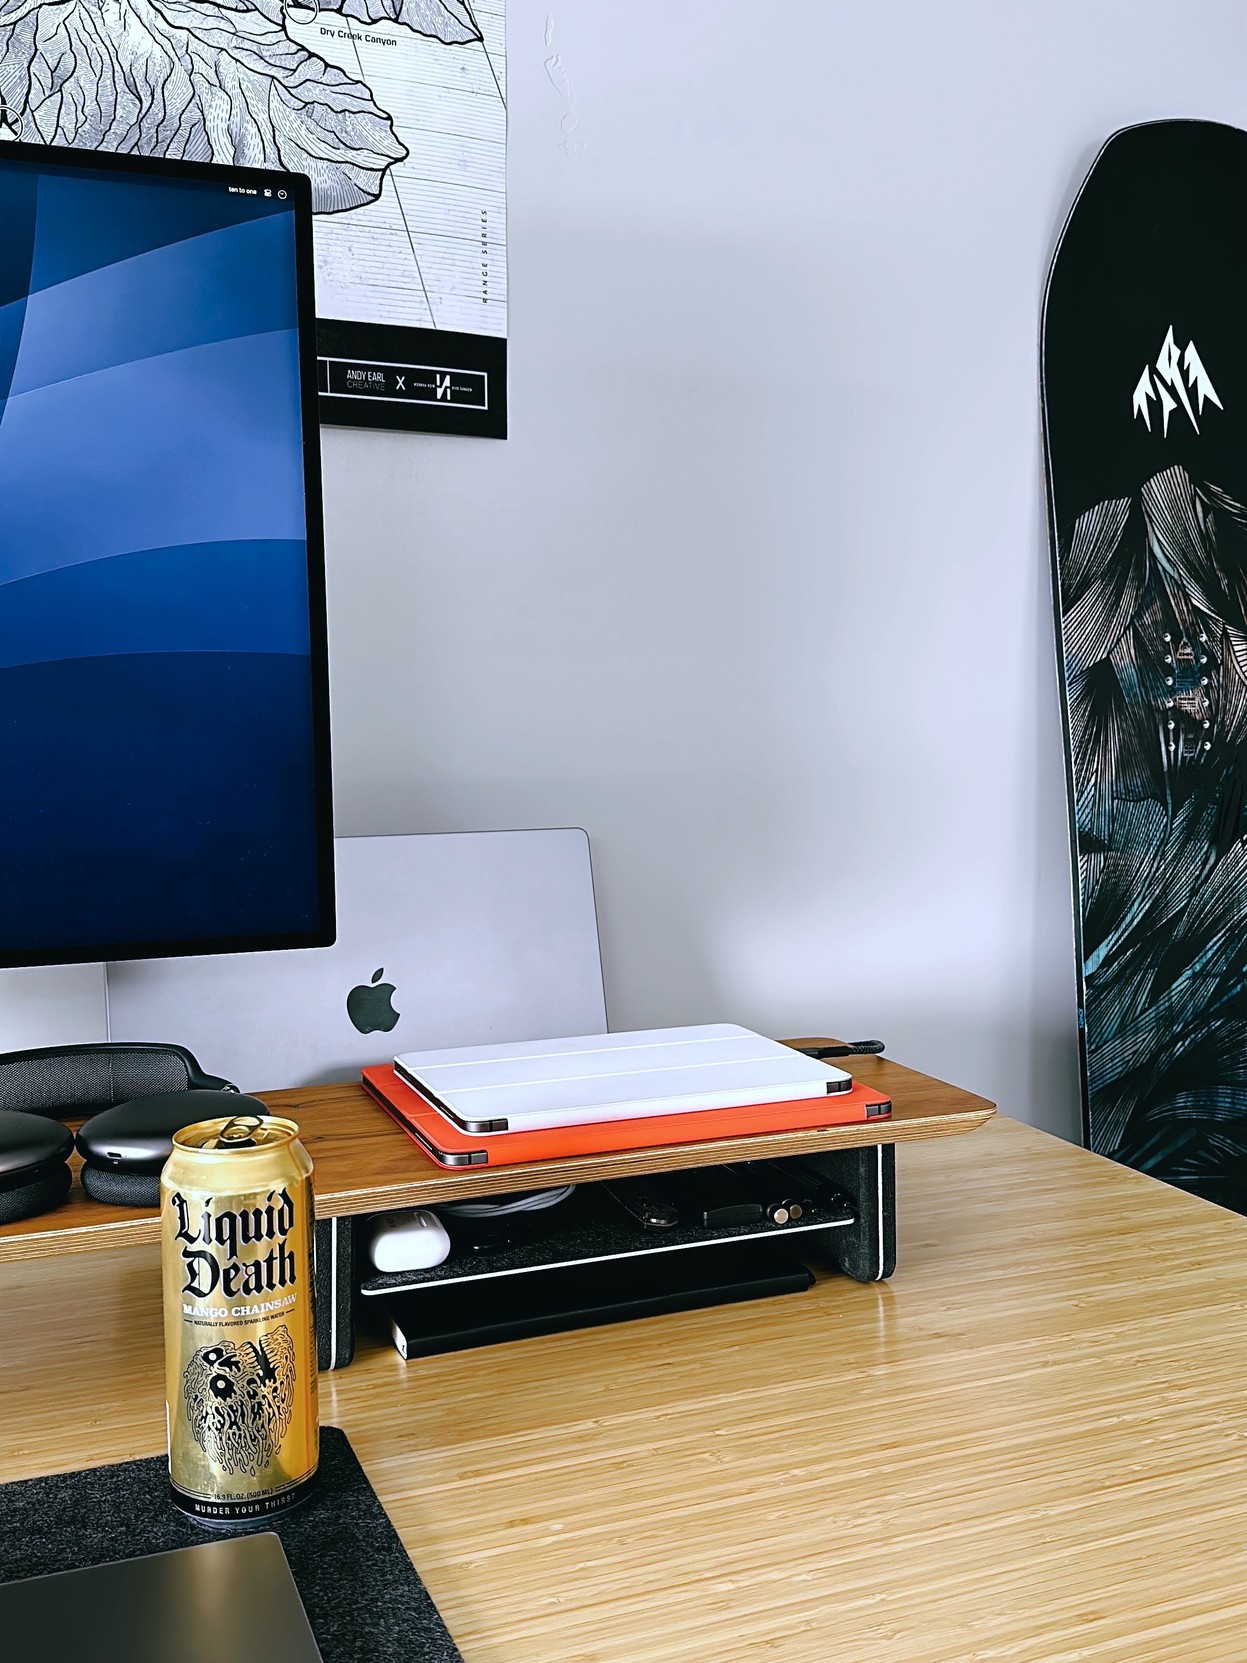 Photograph of a work from home desk setup. Pictured: part of a Pro Display XDR, AirPods Max, MacBook Pro, two iPad Pros, a Liquid Death Mango Chainsaw, and a Jones brand snowboard neatly arranged on a desk.